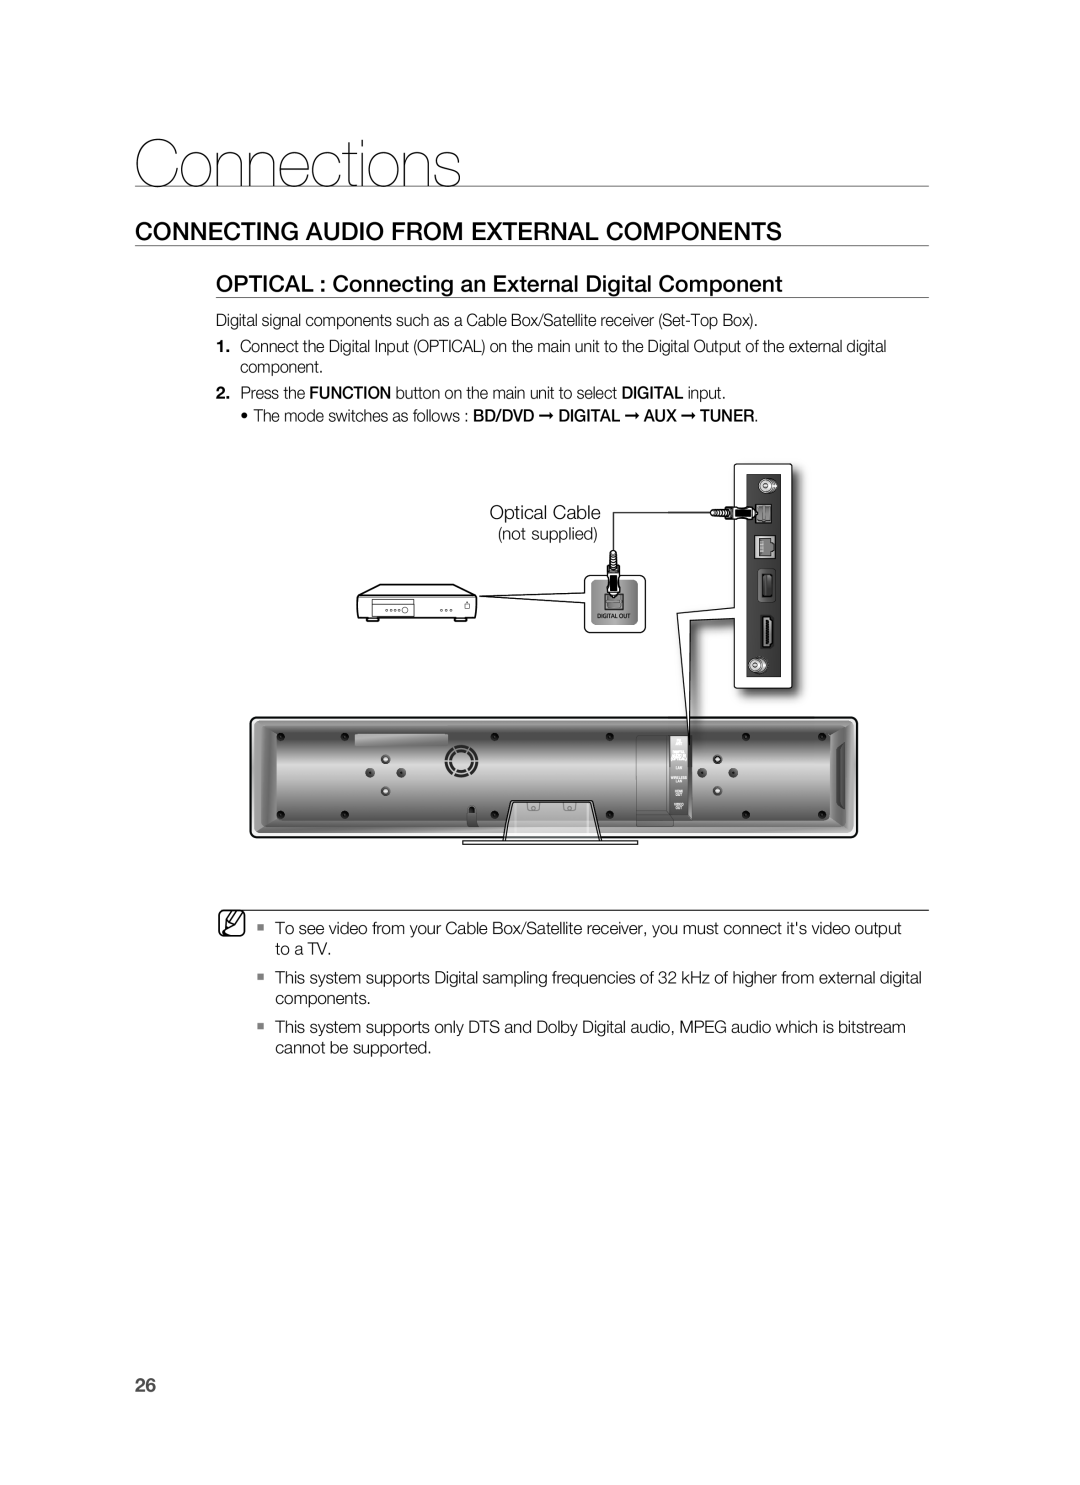 Samsung HT-BD8200 user manual Connecting Audio From External Components, Connections, Optical Cable 